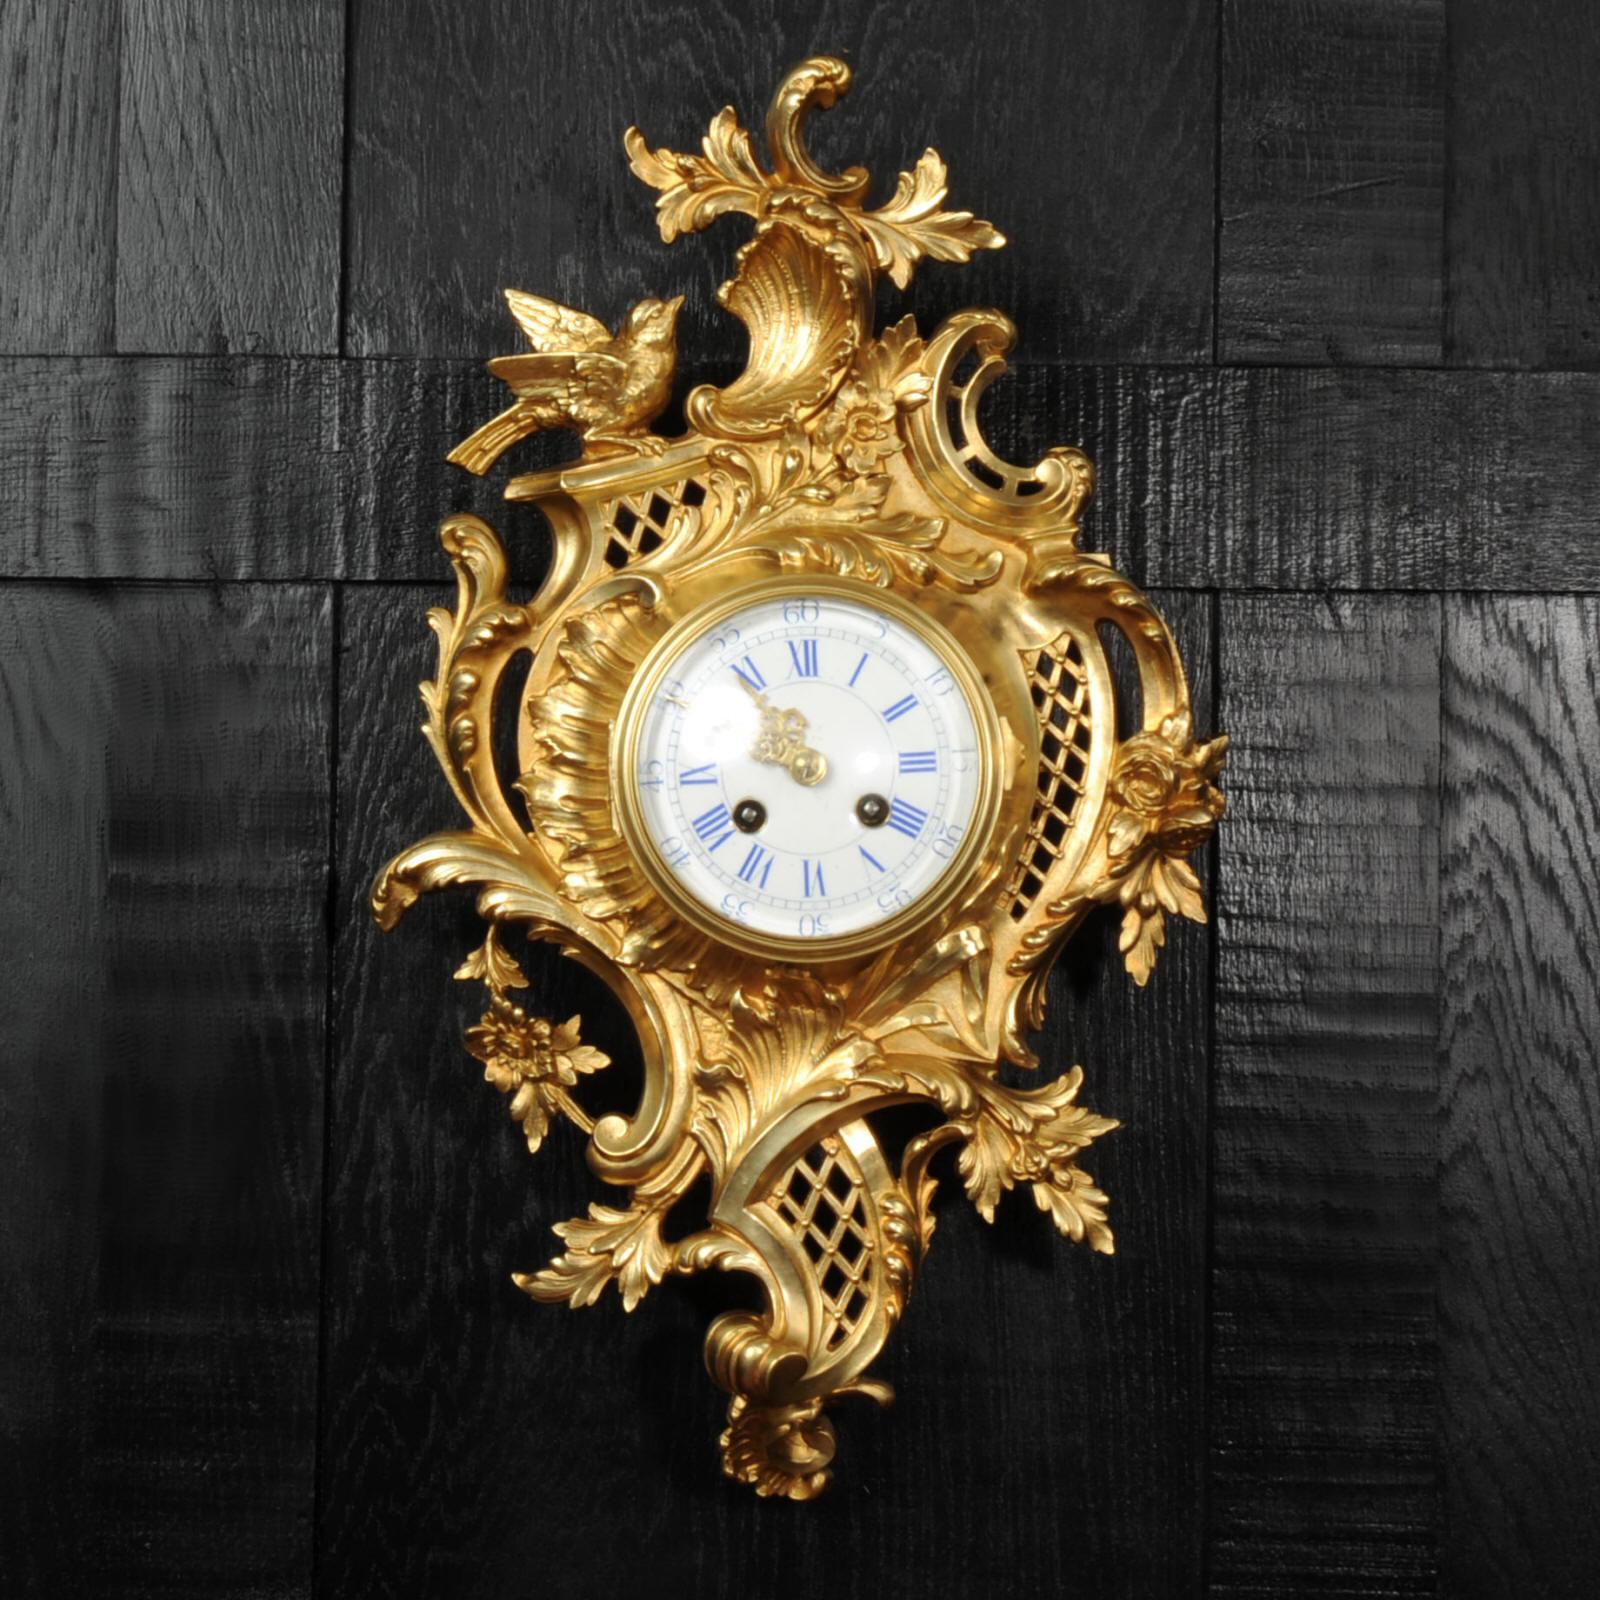 A stunning original antique French gilt bronze Cartel wall clock by Japy Frères. It is beautifully designed in the Rococo style, asymmetrical panels of curving trellis work, covered with flowers and entwined foliage. To the top, a bird gently lands